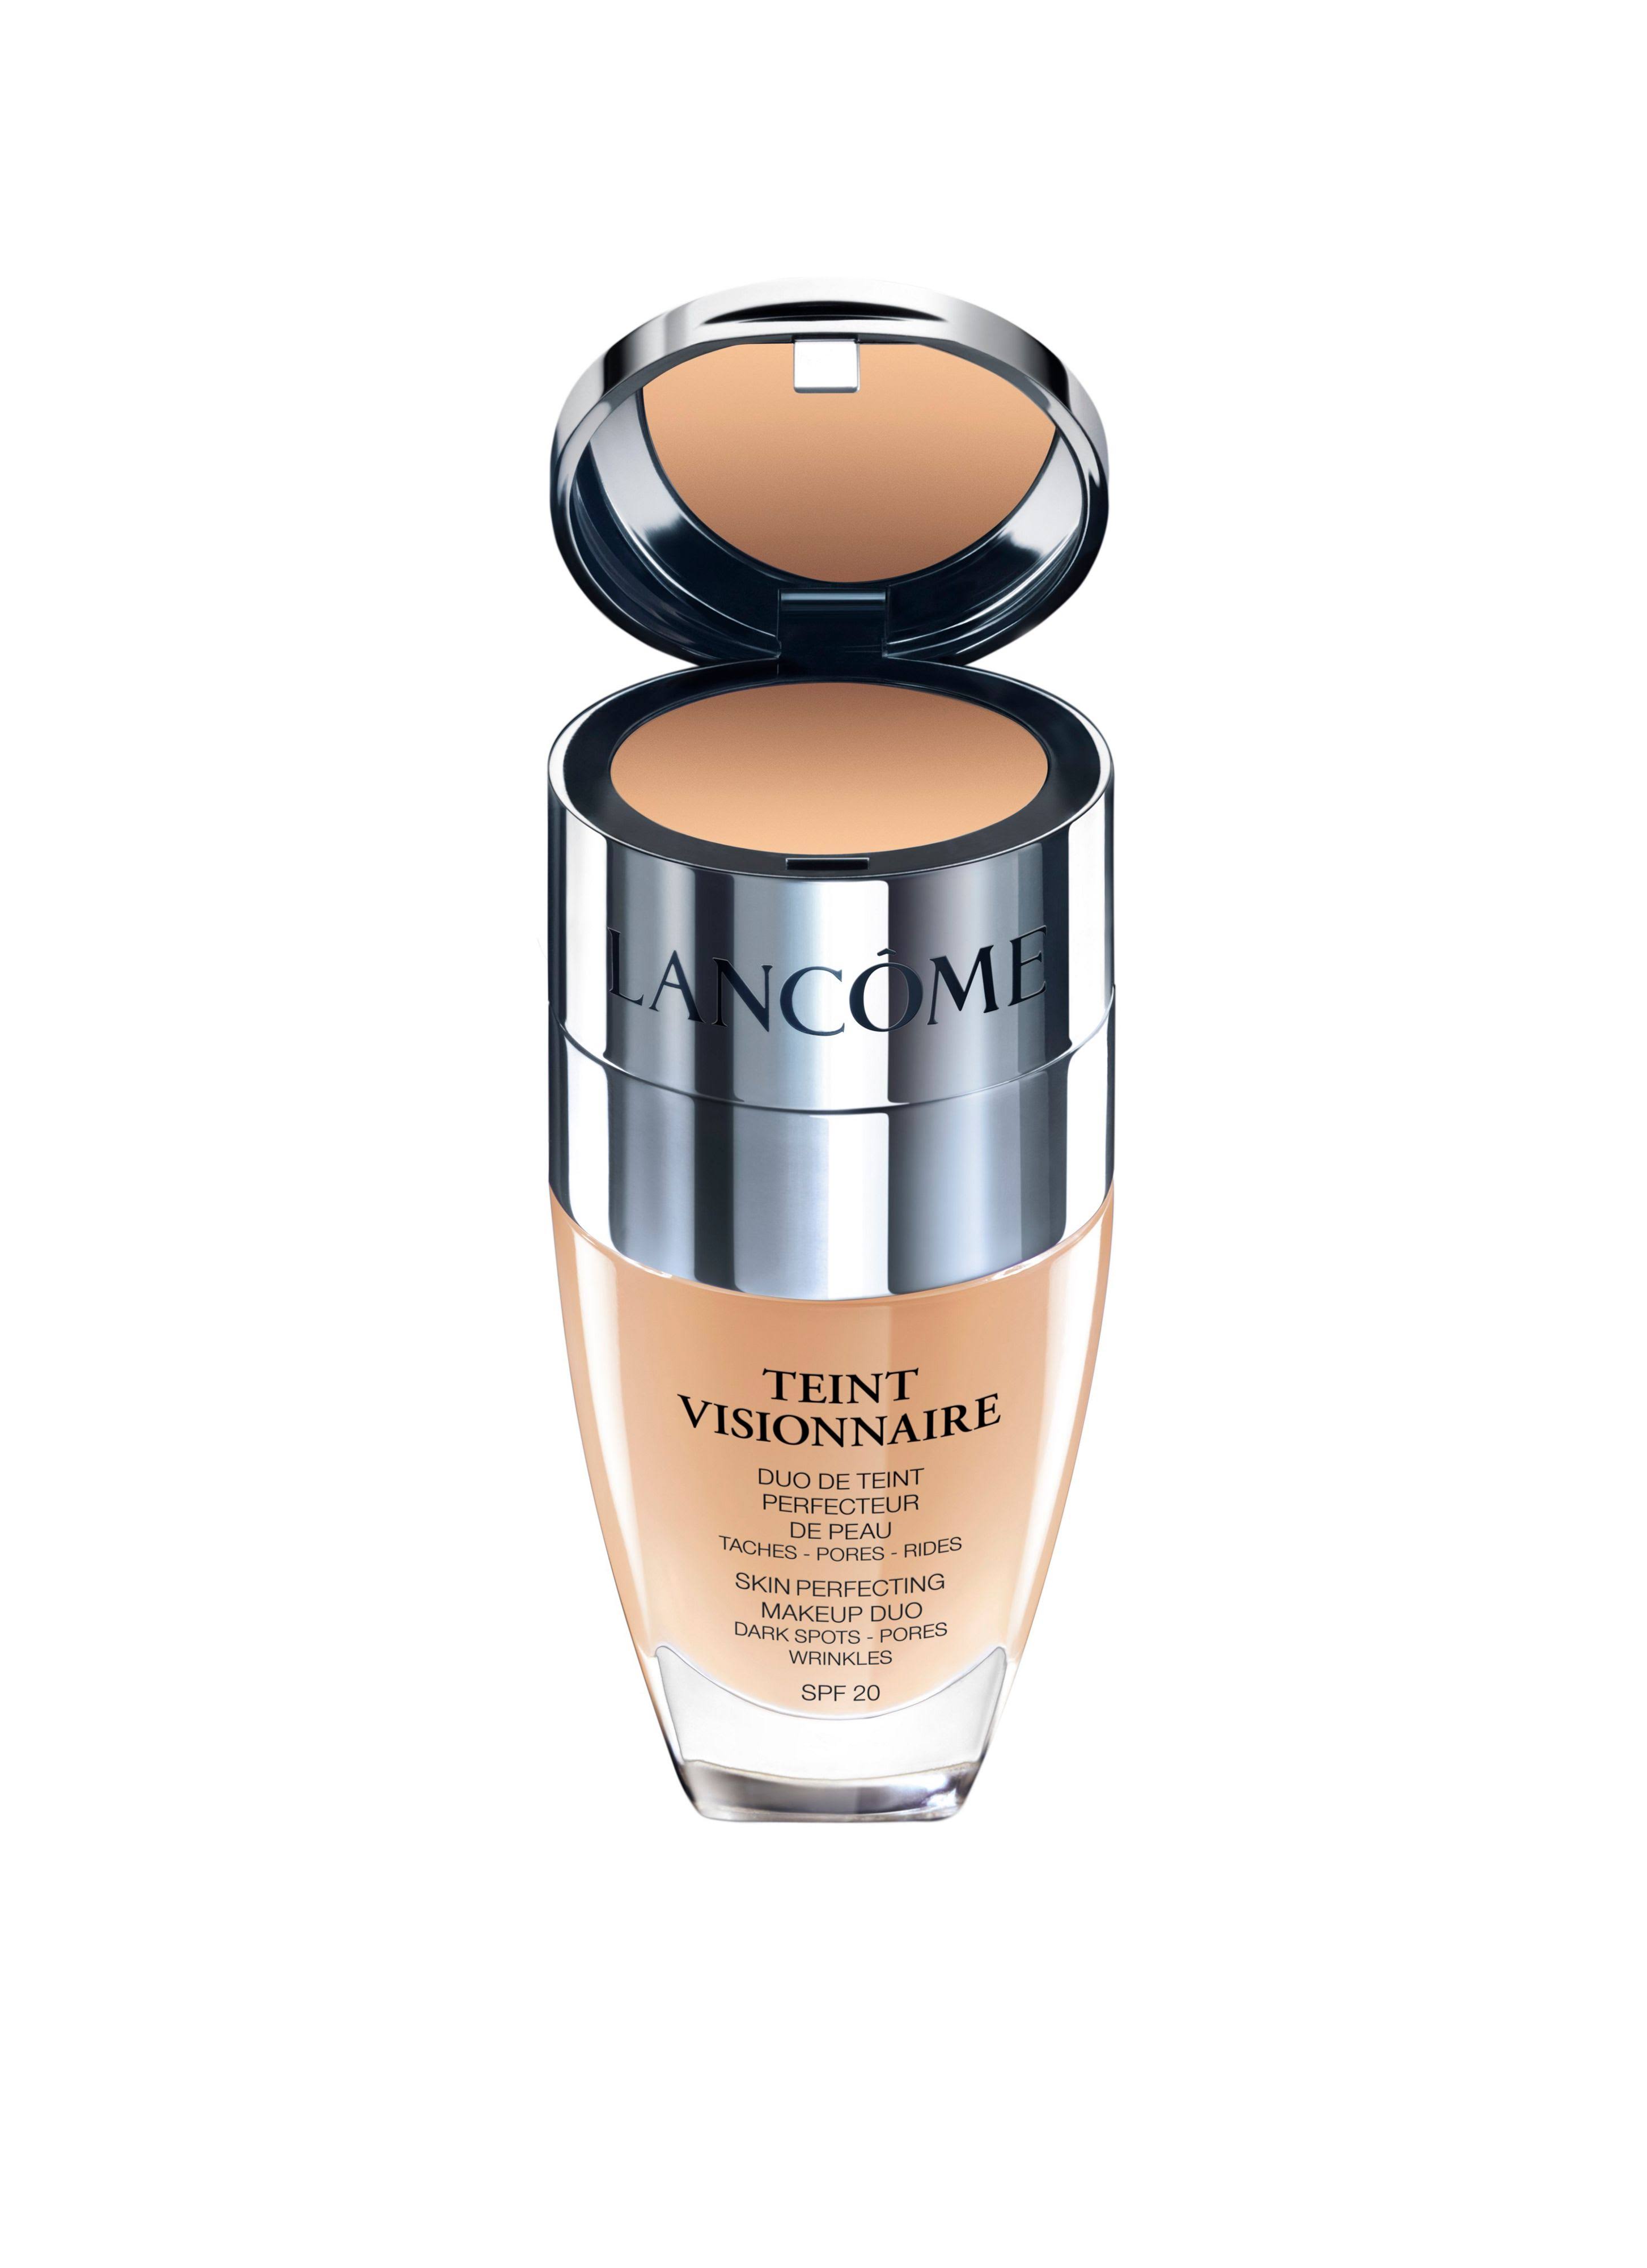 Lancome Teint Visionnaire Skin Perfecting Makeup 045 Sable Beige